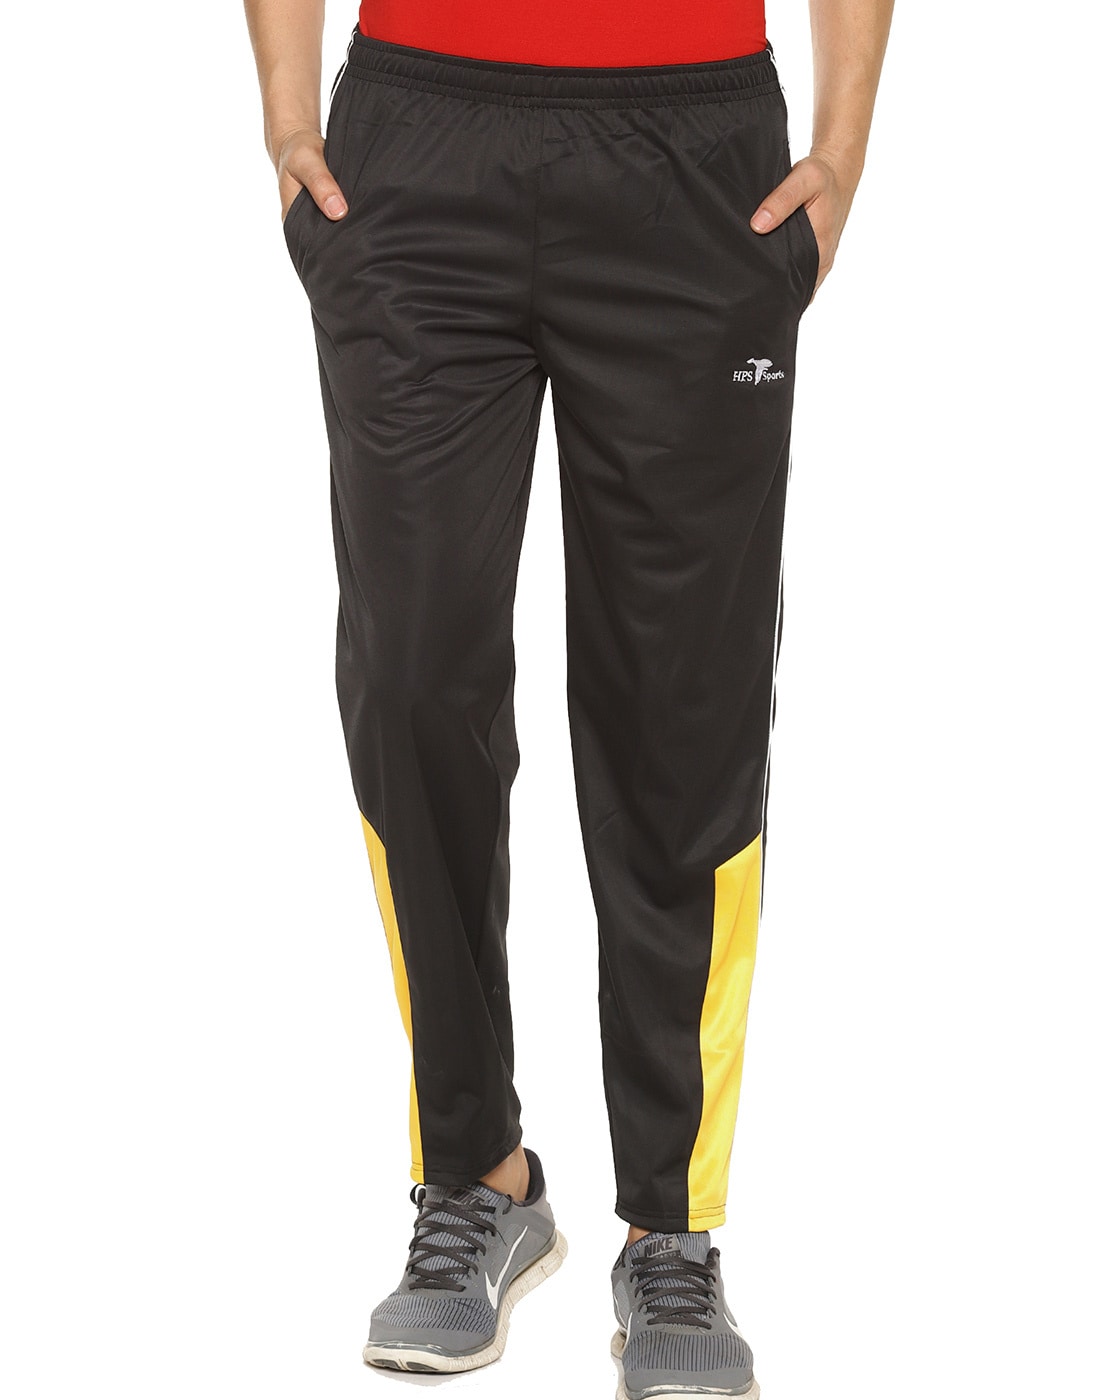 Shiv Naresh - Multicolor Polyester Men's Sports Trackpants ( Pack of 1 ) -  Buy Shiv Naresh - Multicolor Polyester Men's Sports Trackpants ( Pack of 1  ) Online at Best Prices in India on Snapdeal